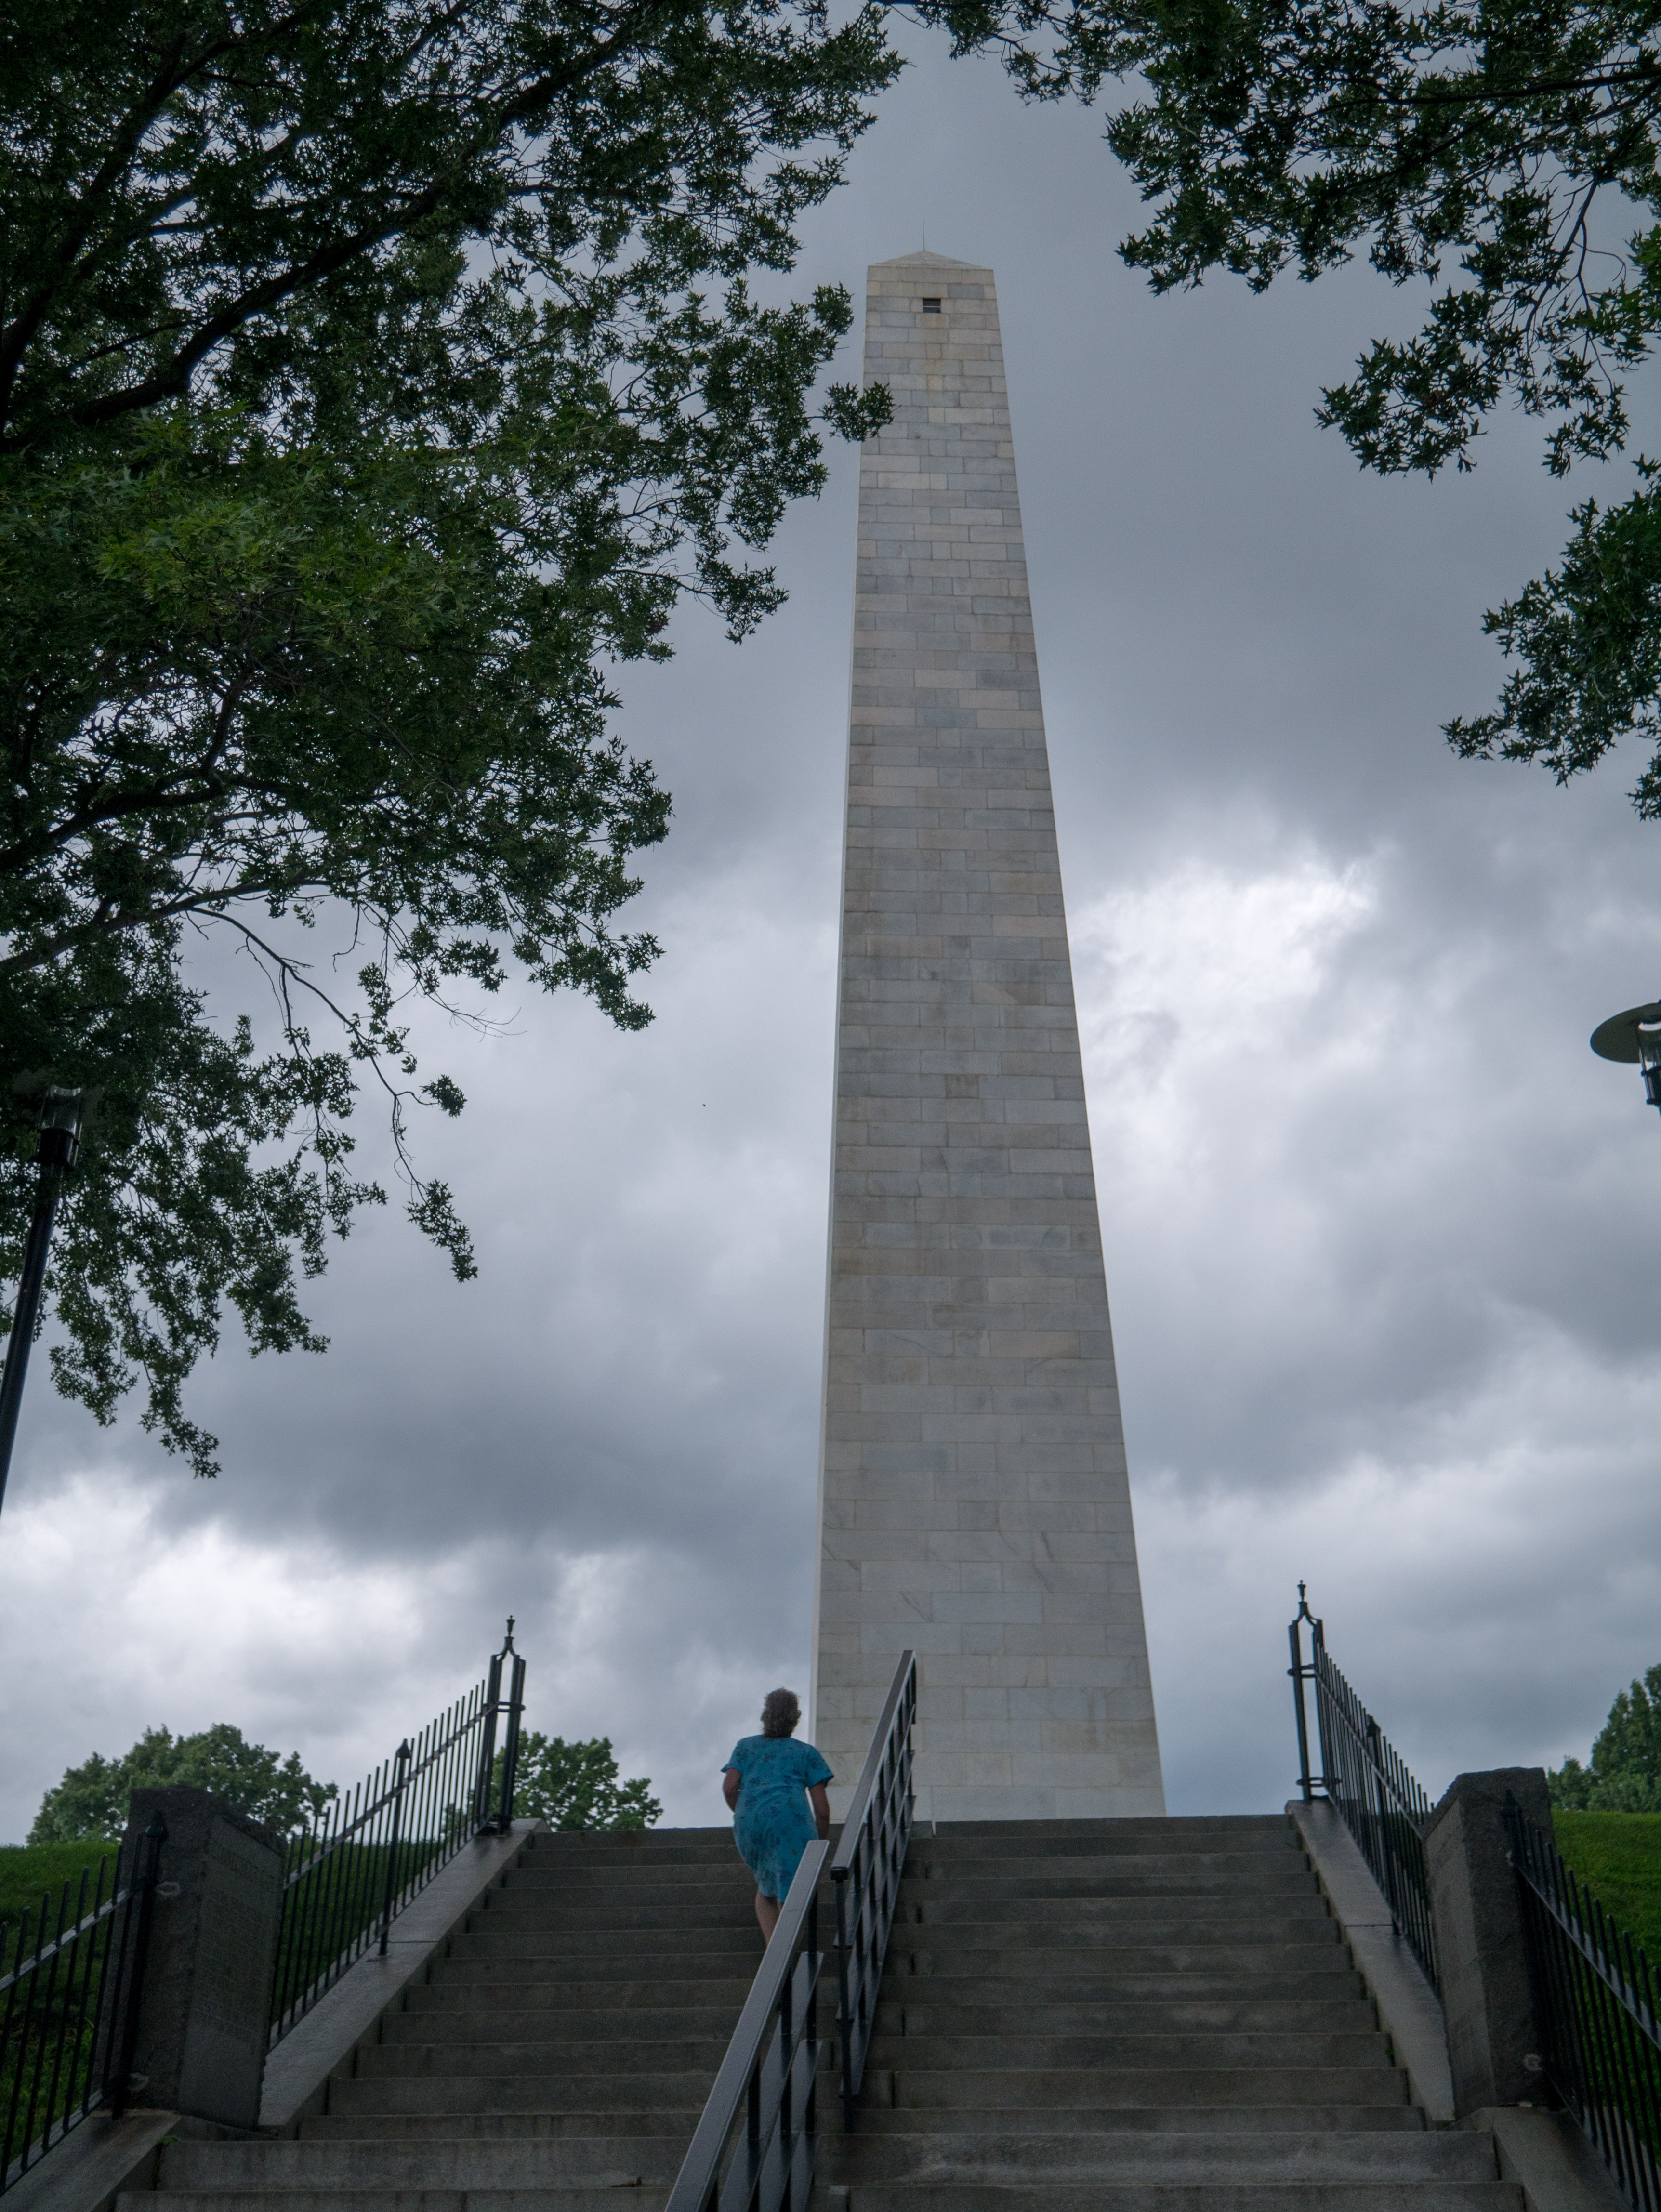 Stairs leading up to the Bunker Hill monument